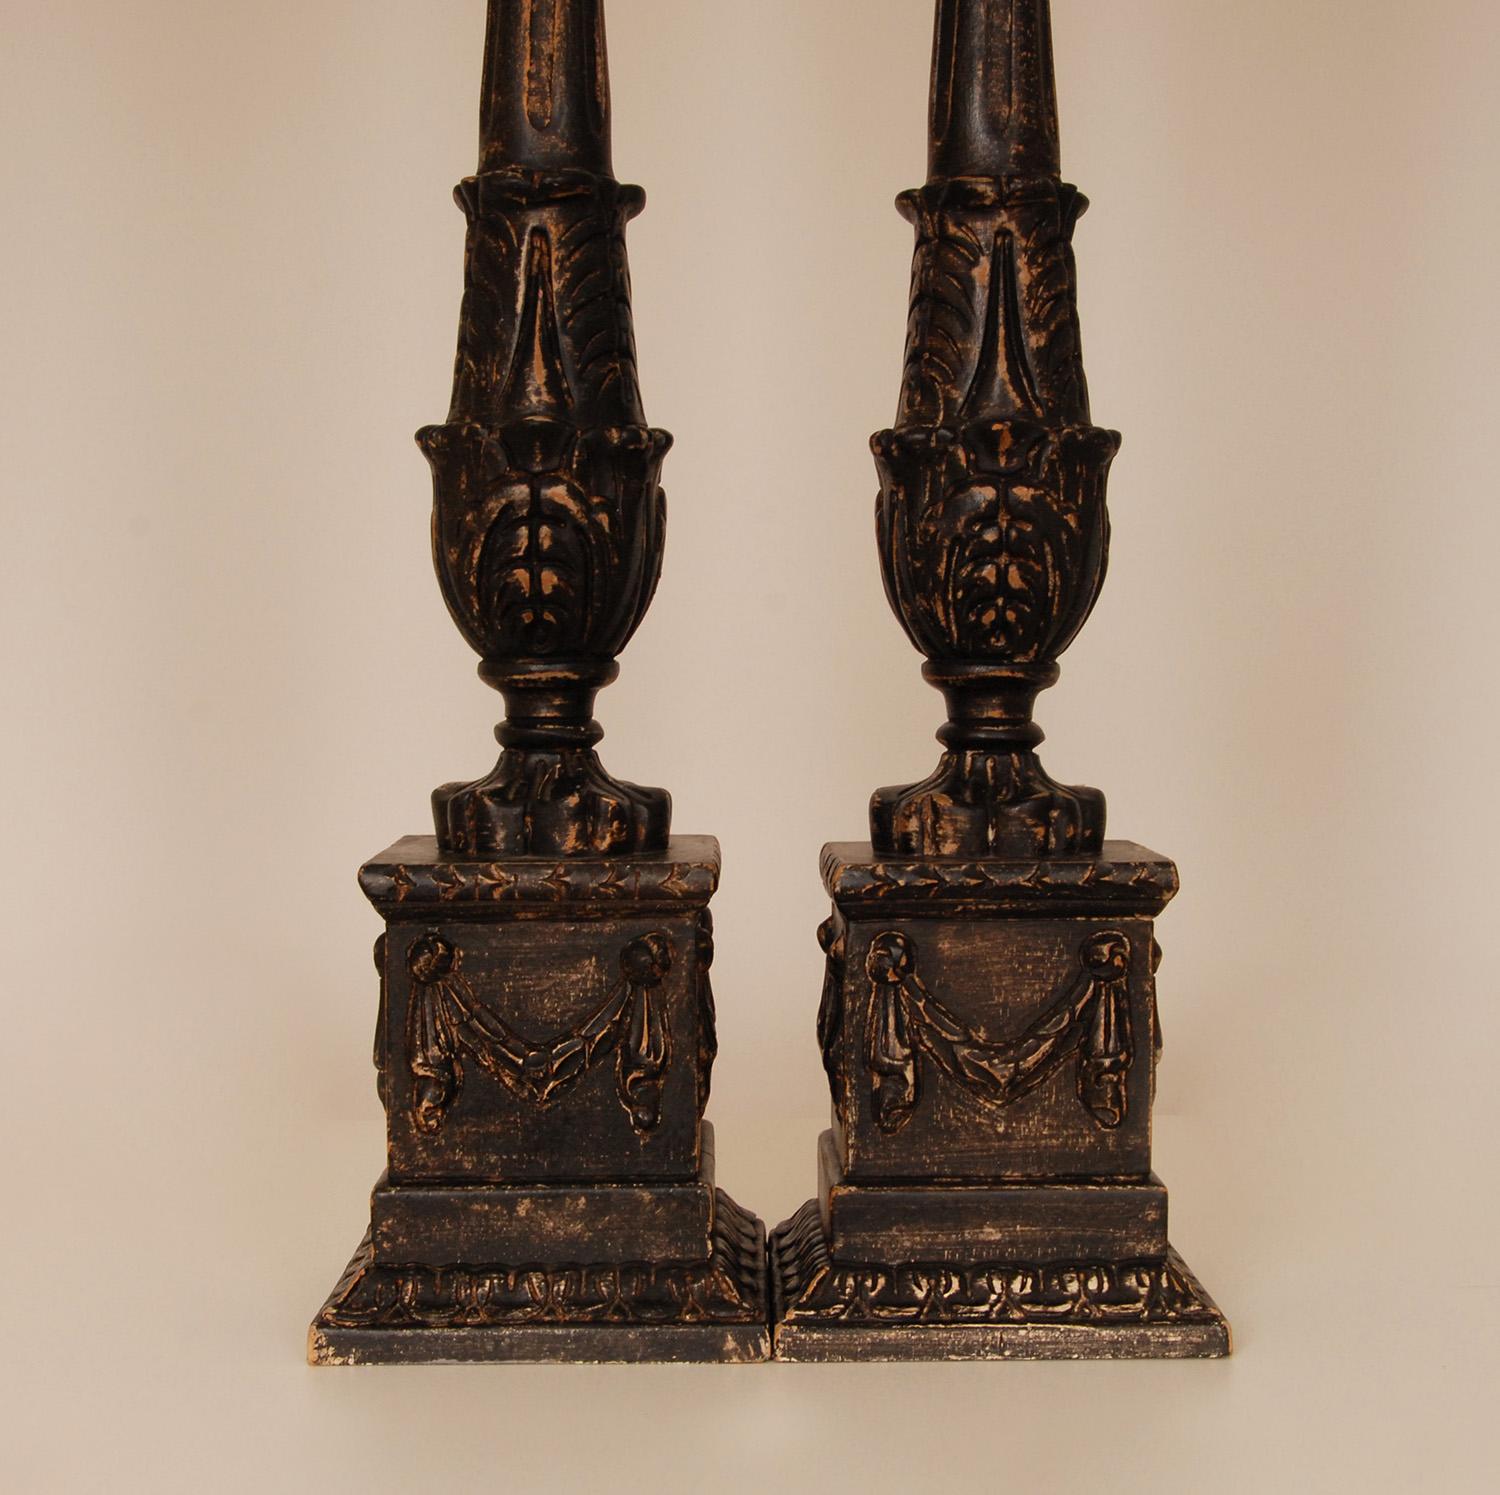 Vintage Tall French black Ebonised Neoclassical Lamps with Cream Baroque shades.
Style, Vintage, Neoclassical, Mid Century, Traditional, Classic, France, Louis XVI
Design: Traditional Neoclassical carved and ebonised Column lamps in the manner of